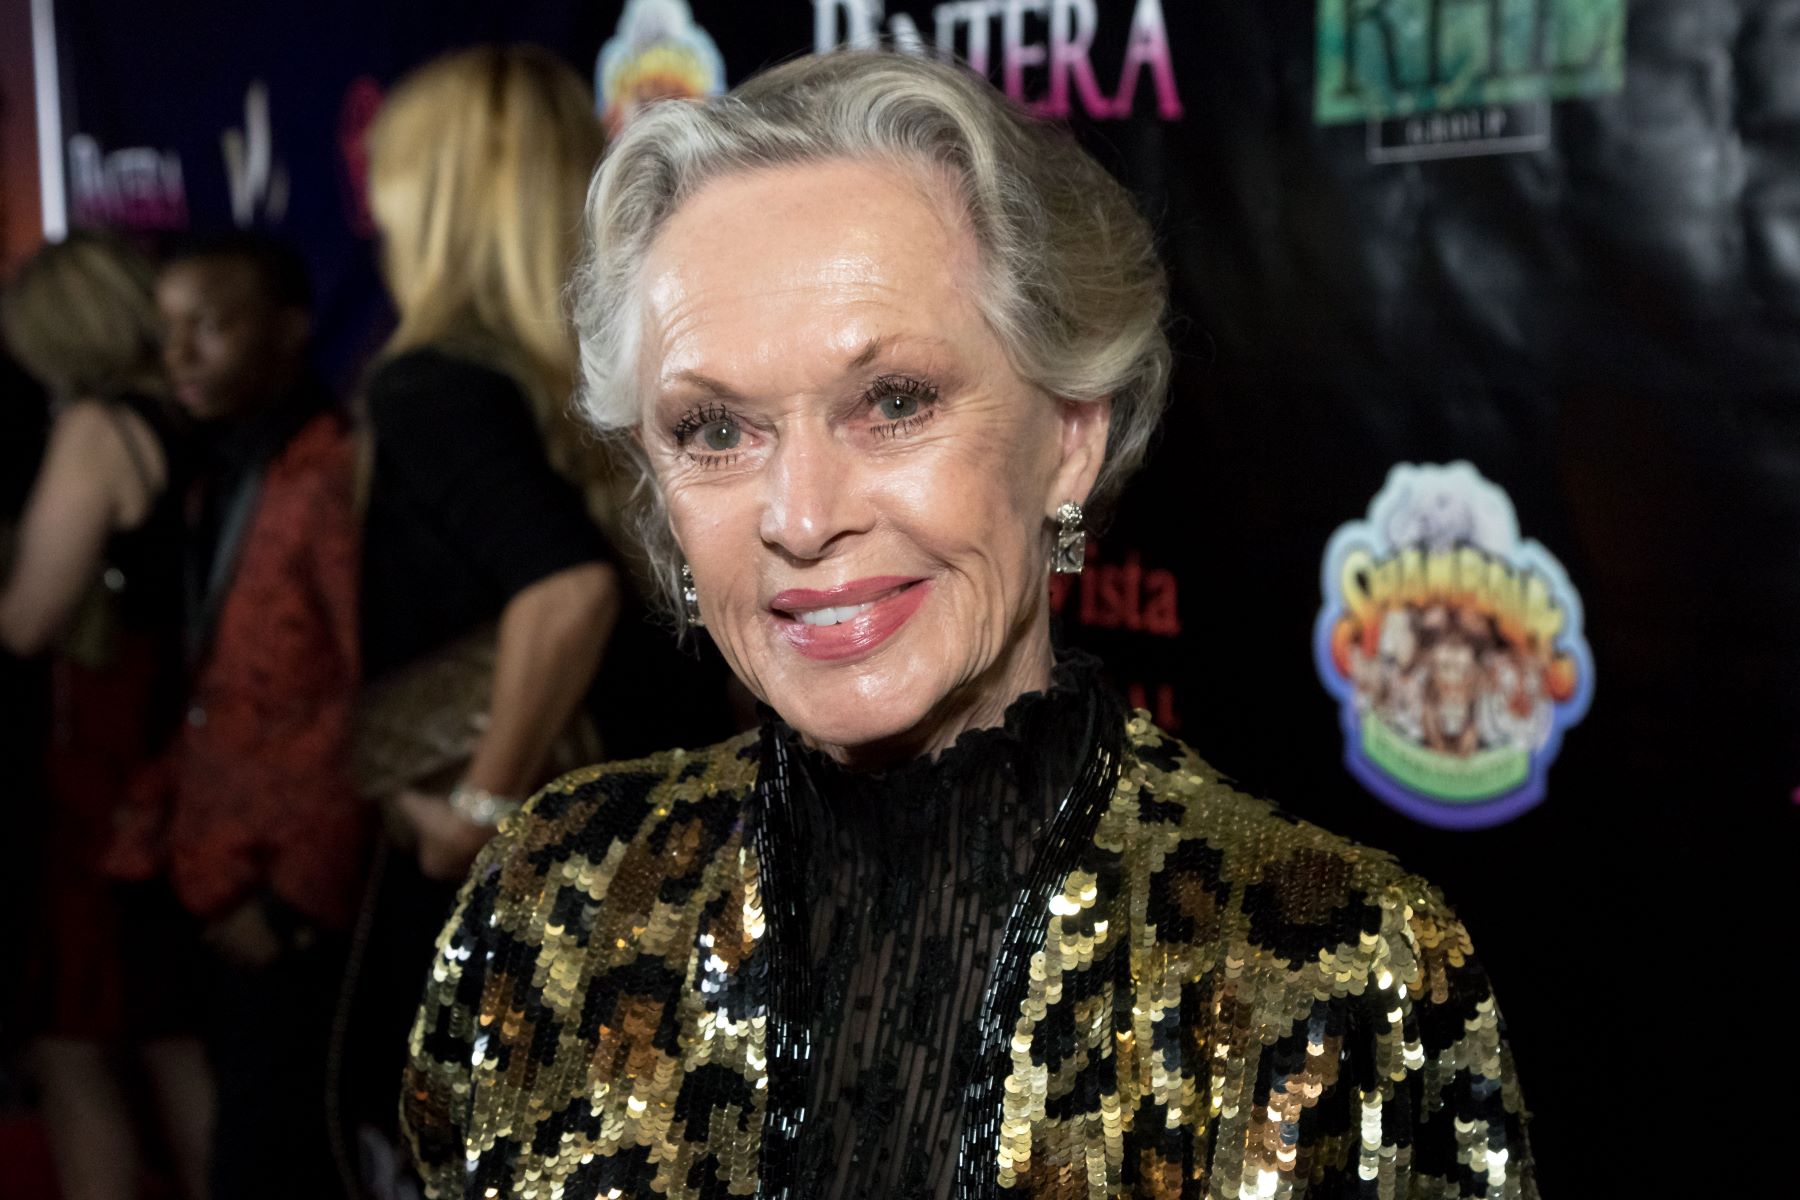 Tippi Hedren at Rio Vista Universal's Valkyrie Awards and Holiday Party in Los Angeles, California